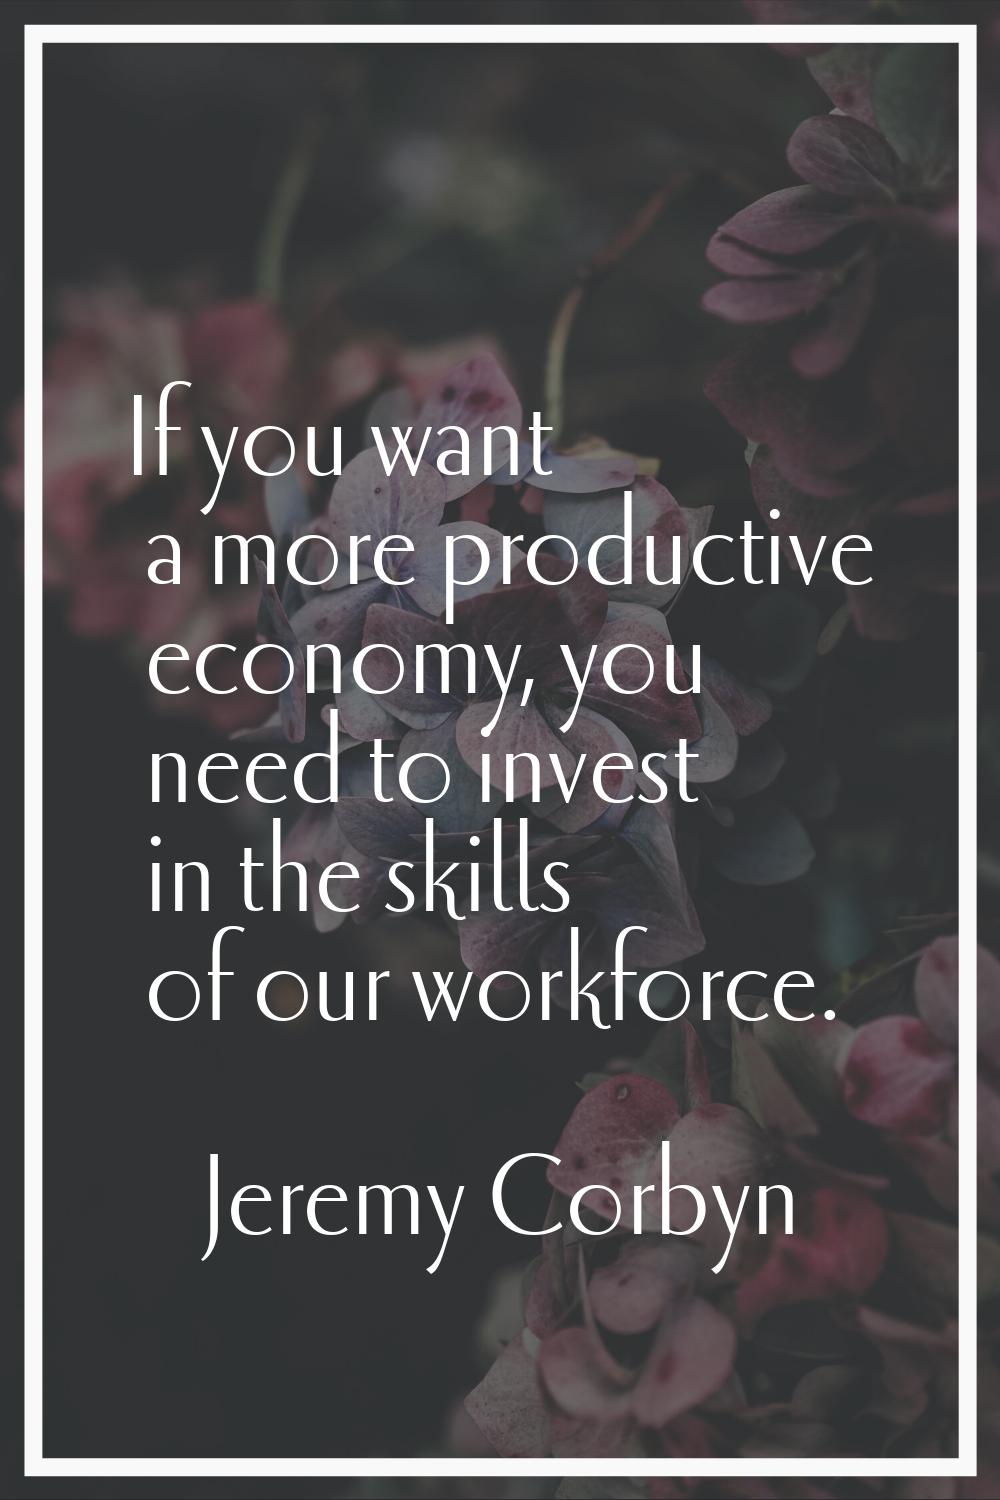 If you want a more productive economy, you need to invest in the skills of our workforce.